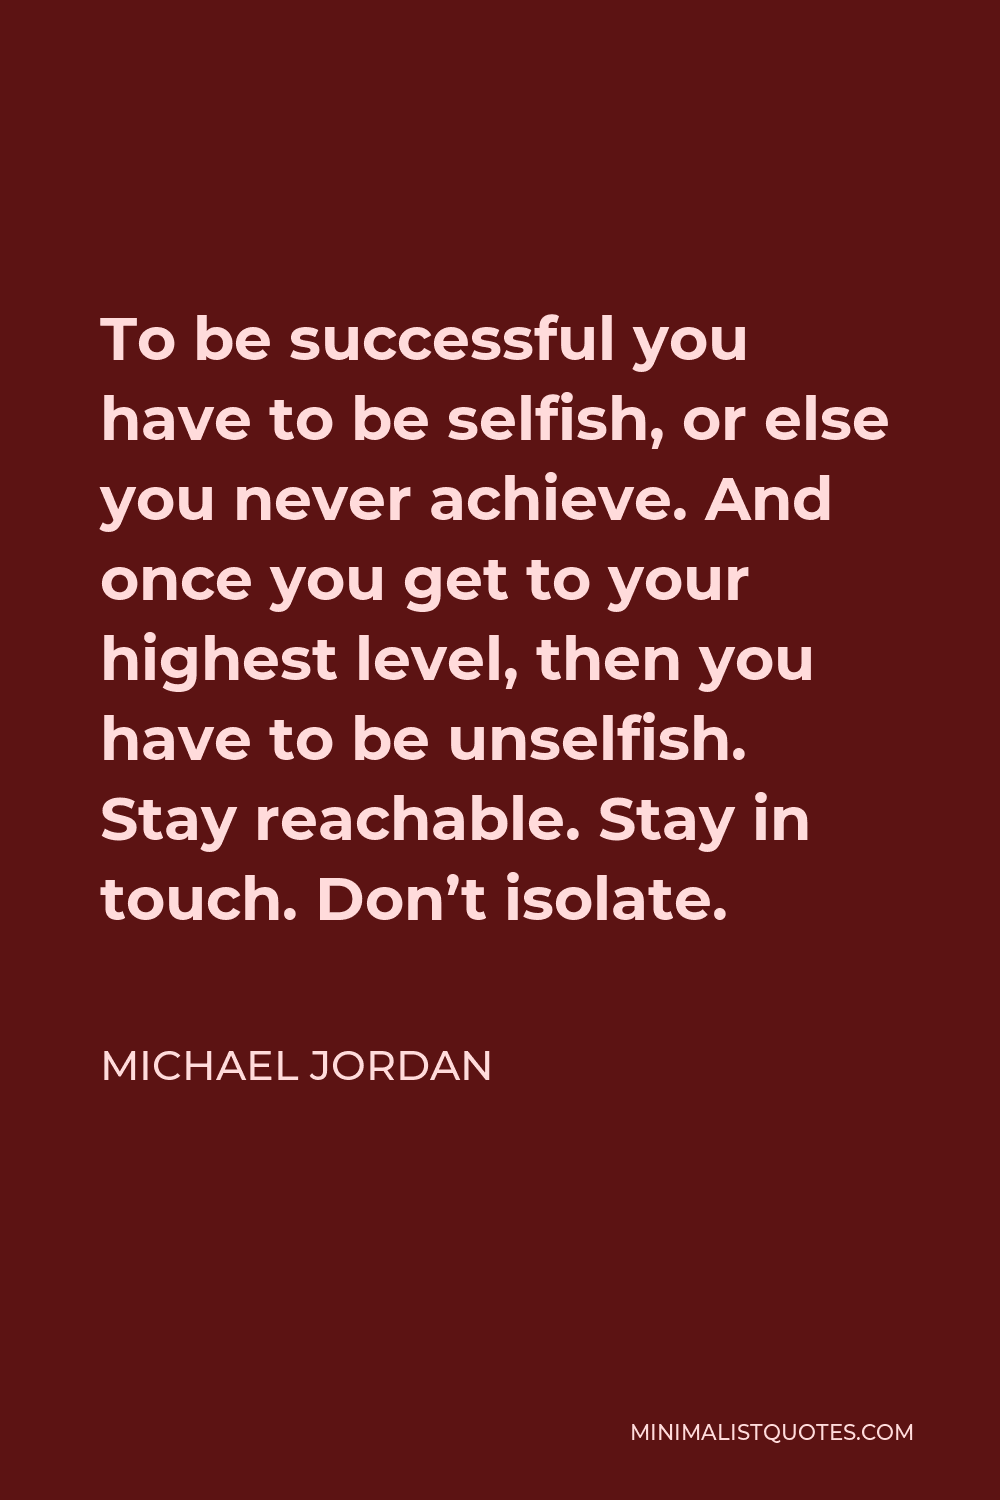 Michael Jordan Quote - To be successful you have to be selfish, or else you never achieve. And once you get to your highest level, then you have to be unselfish. Stay reachable. Stay in touch. Don’t isolate.